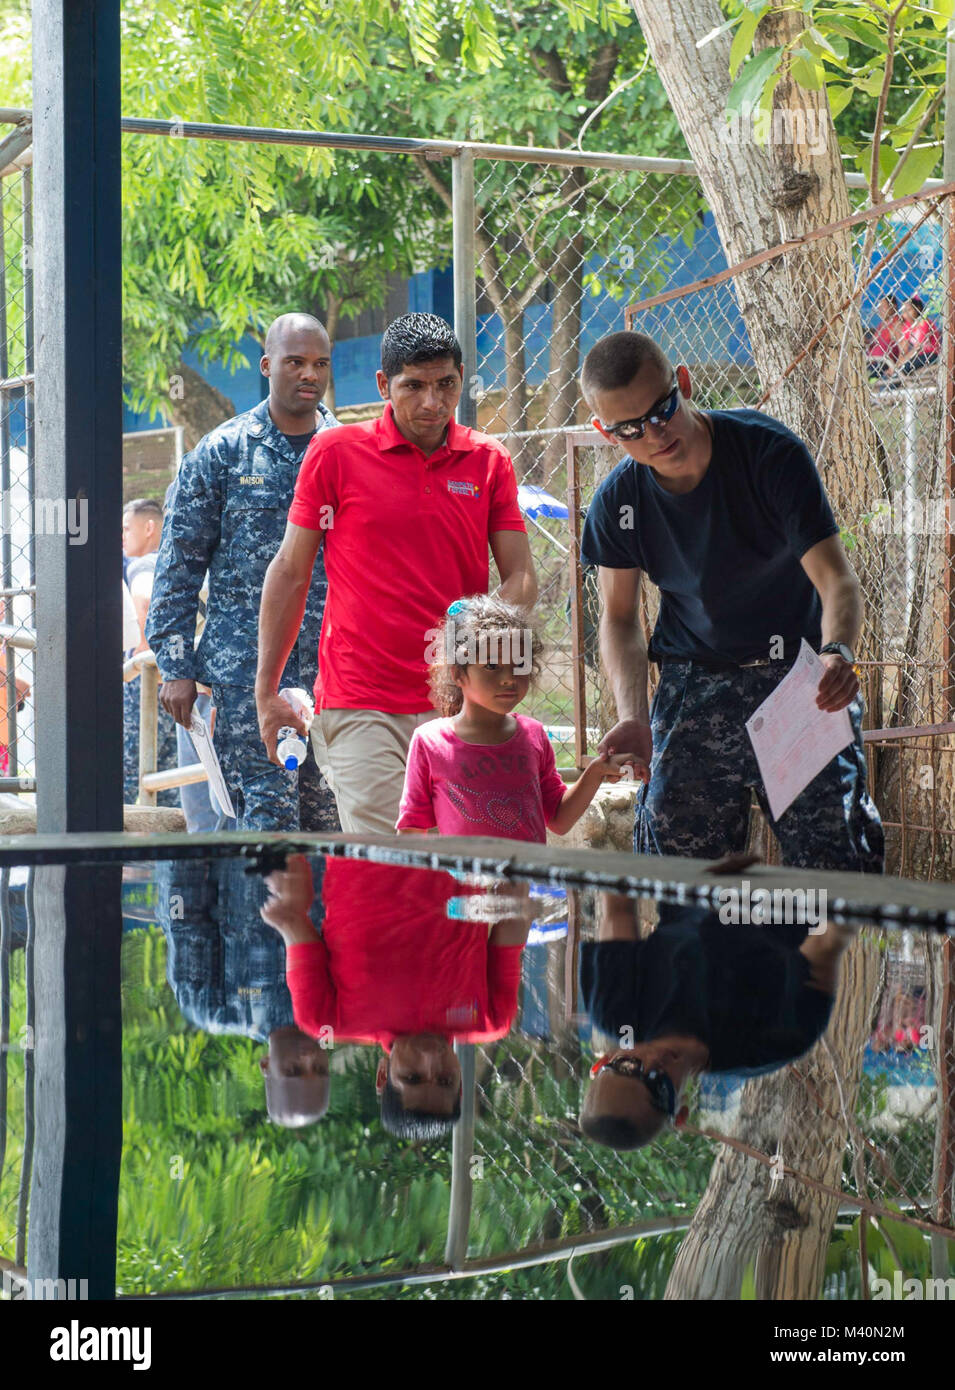 150617-N-PD309-106 SAN JULIAN, El Salvador (June 17, 2015) Hospital Corpsman William Wolff, a native of Wauconda, Ill., assigned to Boone Branch Health Clinic Joint Expeditionary Base Little Creek, Virginia Beach, Va., escorts a patient at a medical site established at Centro Escolar Doctor Eduardo Enrique Barrientos during Continuing Promise 2015. Continuing Promise is a U.S. Southern Command-sponsored and U.S. Naval Forces Southern Command/U.S. 4th Fleet-conducted deployment to conduct civil-military operations including humanitarian-civil assistance, subject matter expert exchanges, medical Stock Photo